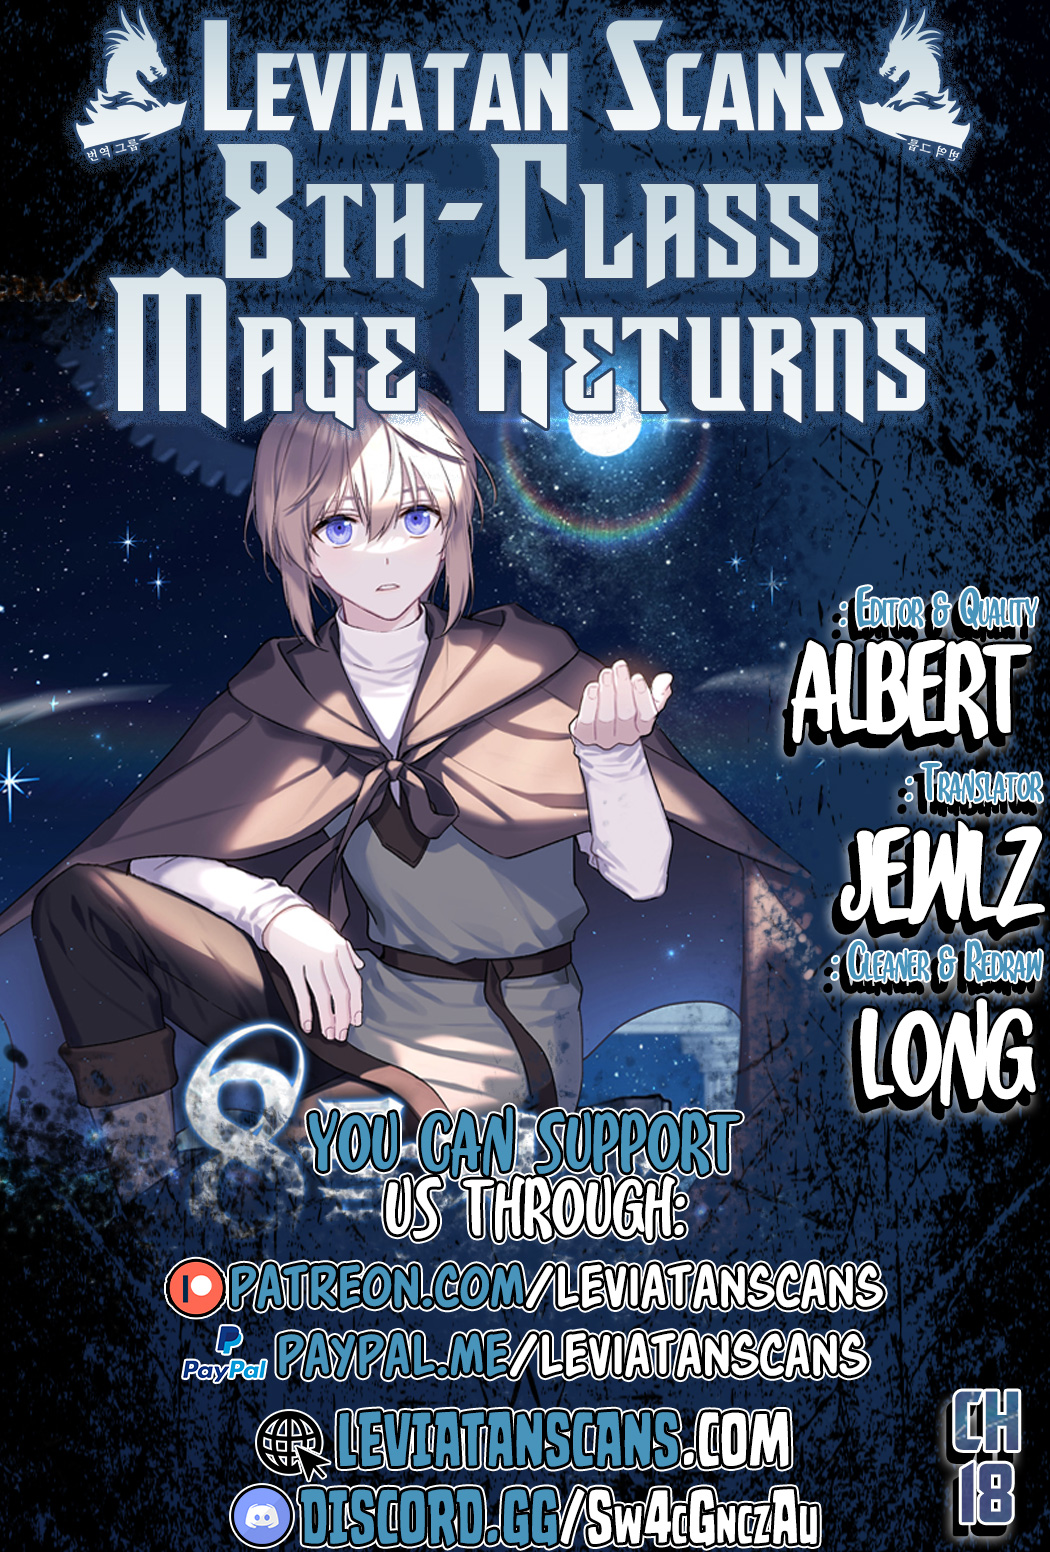 Return of the 8th Class Magician - Chapter 7137 - Image 1